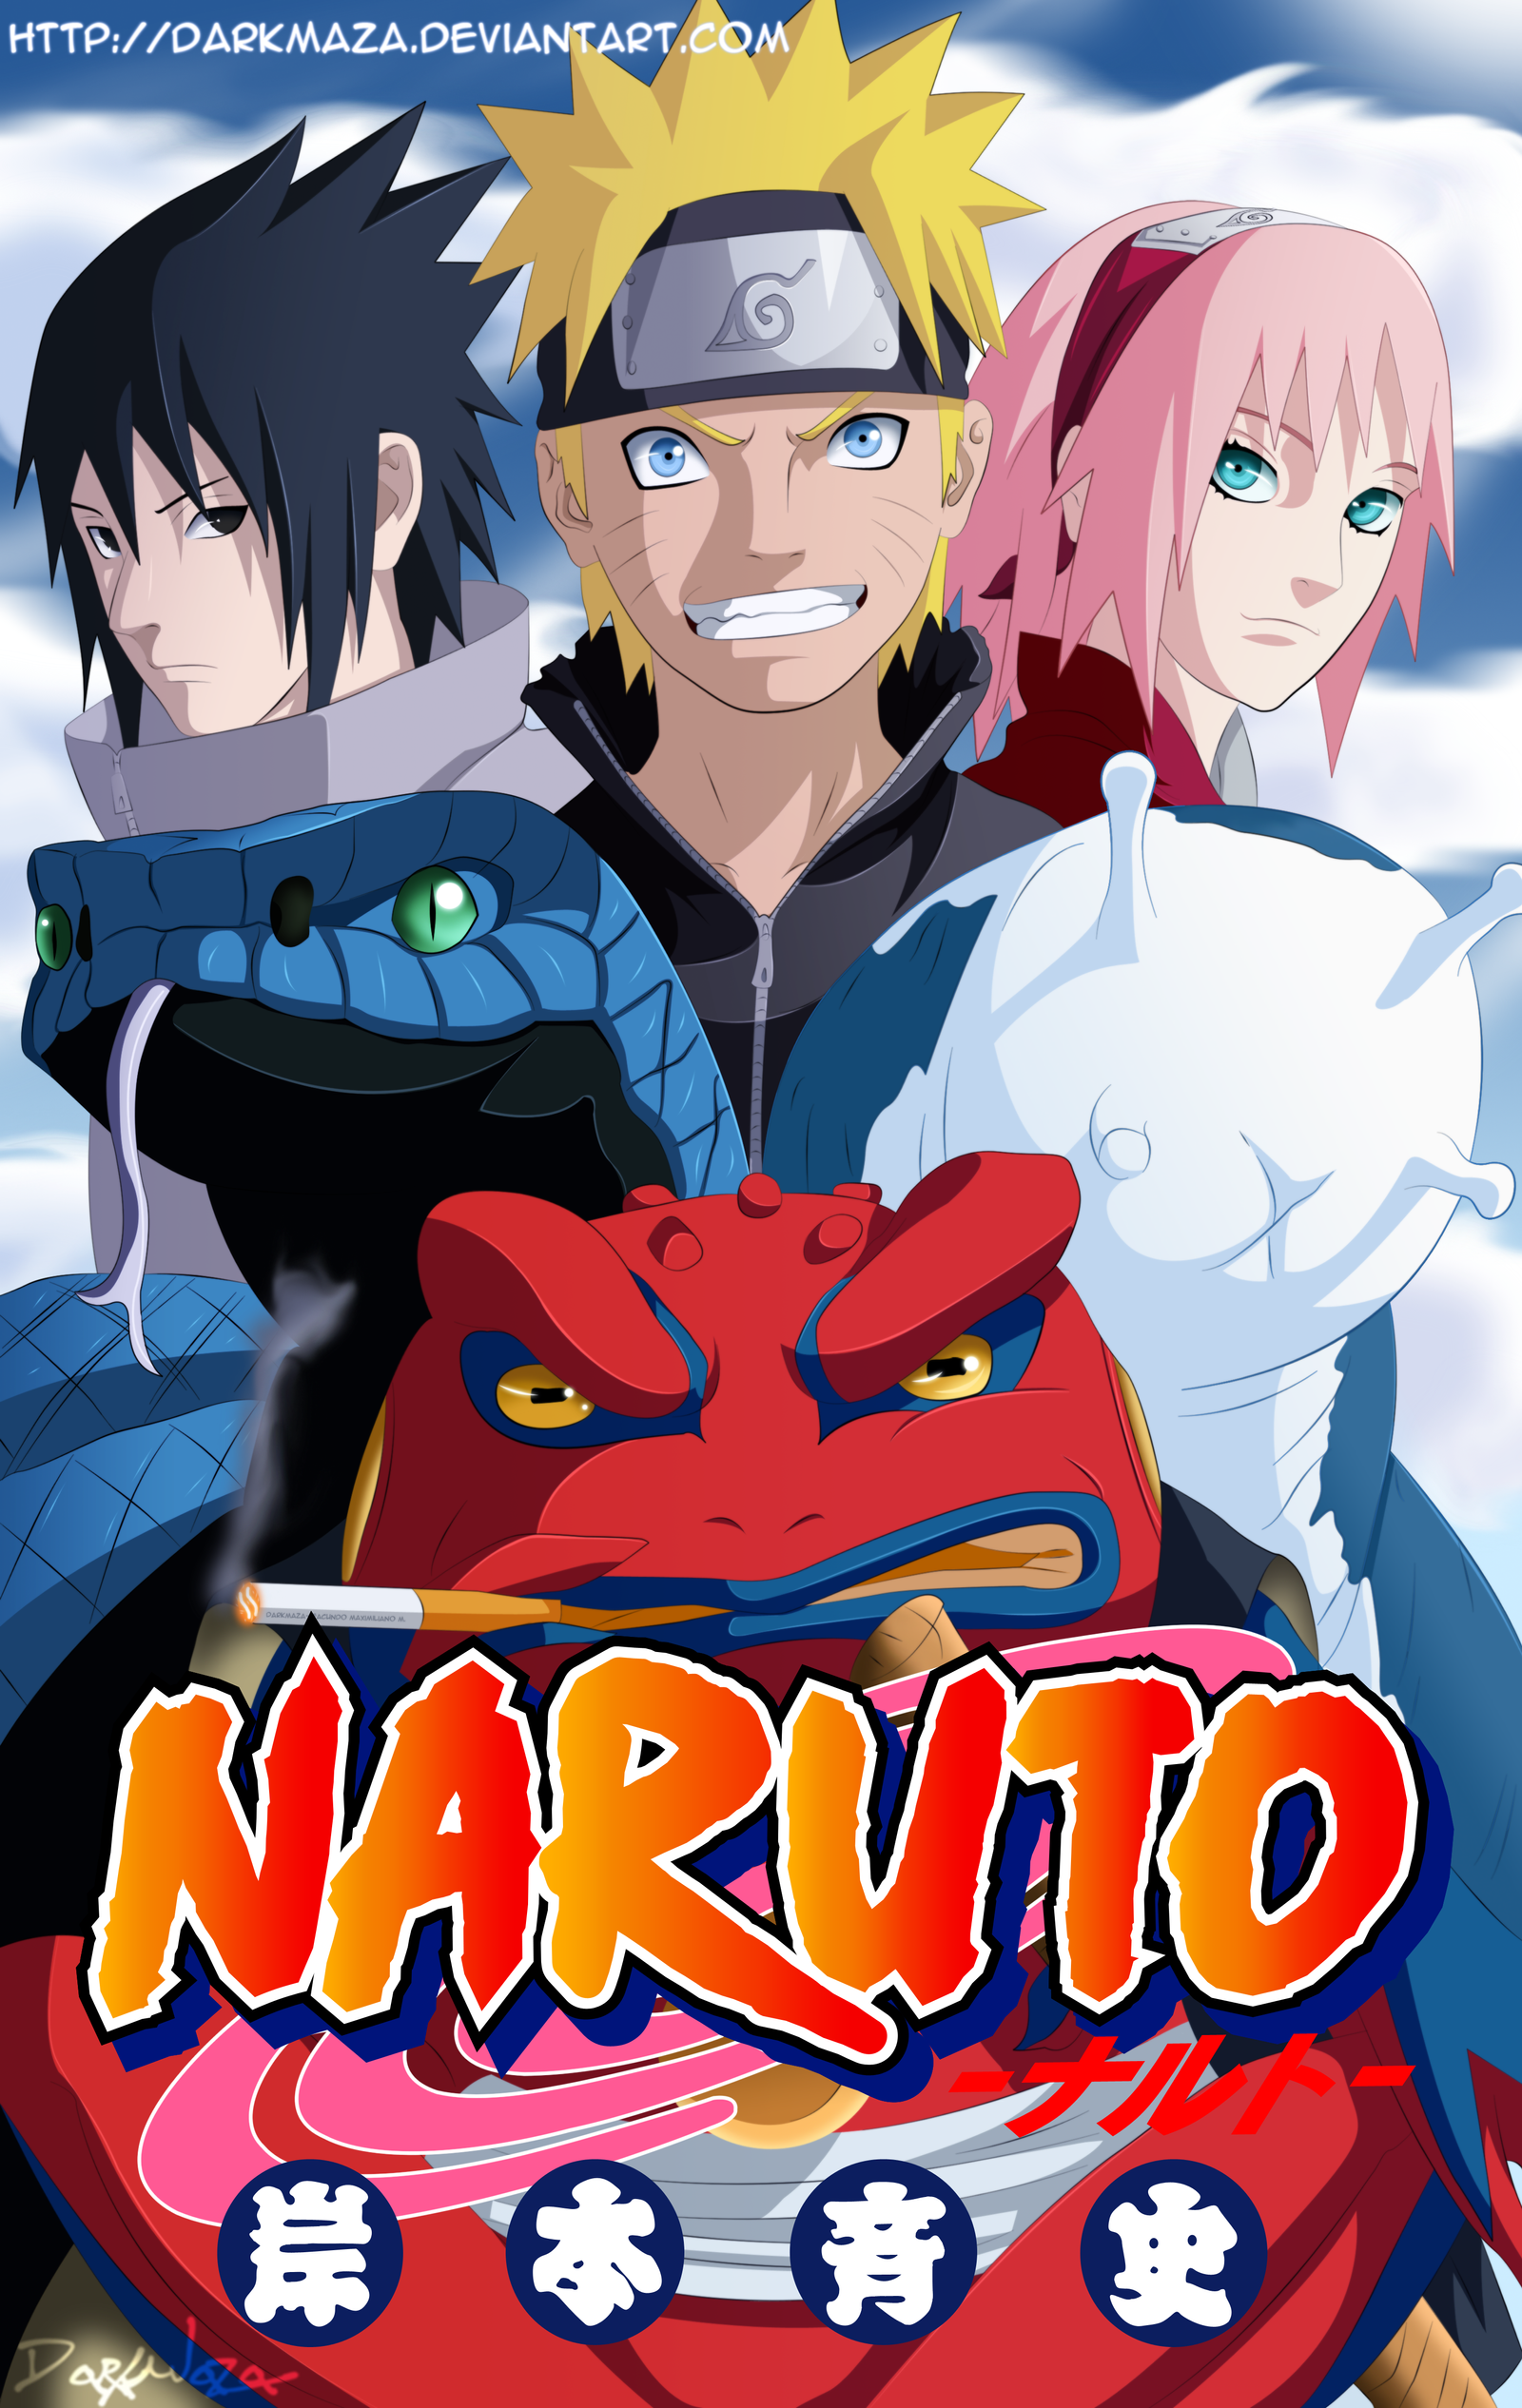 naruto_cover_66_by_darkmaza-d6kn7l0.png